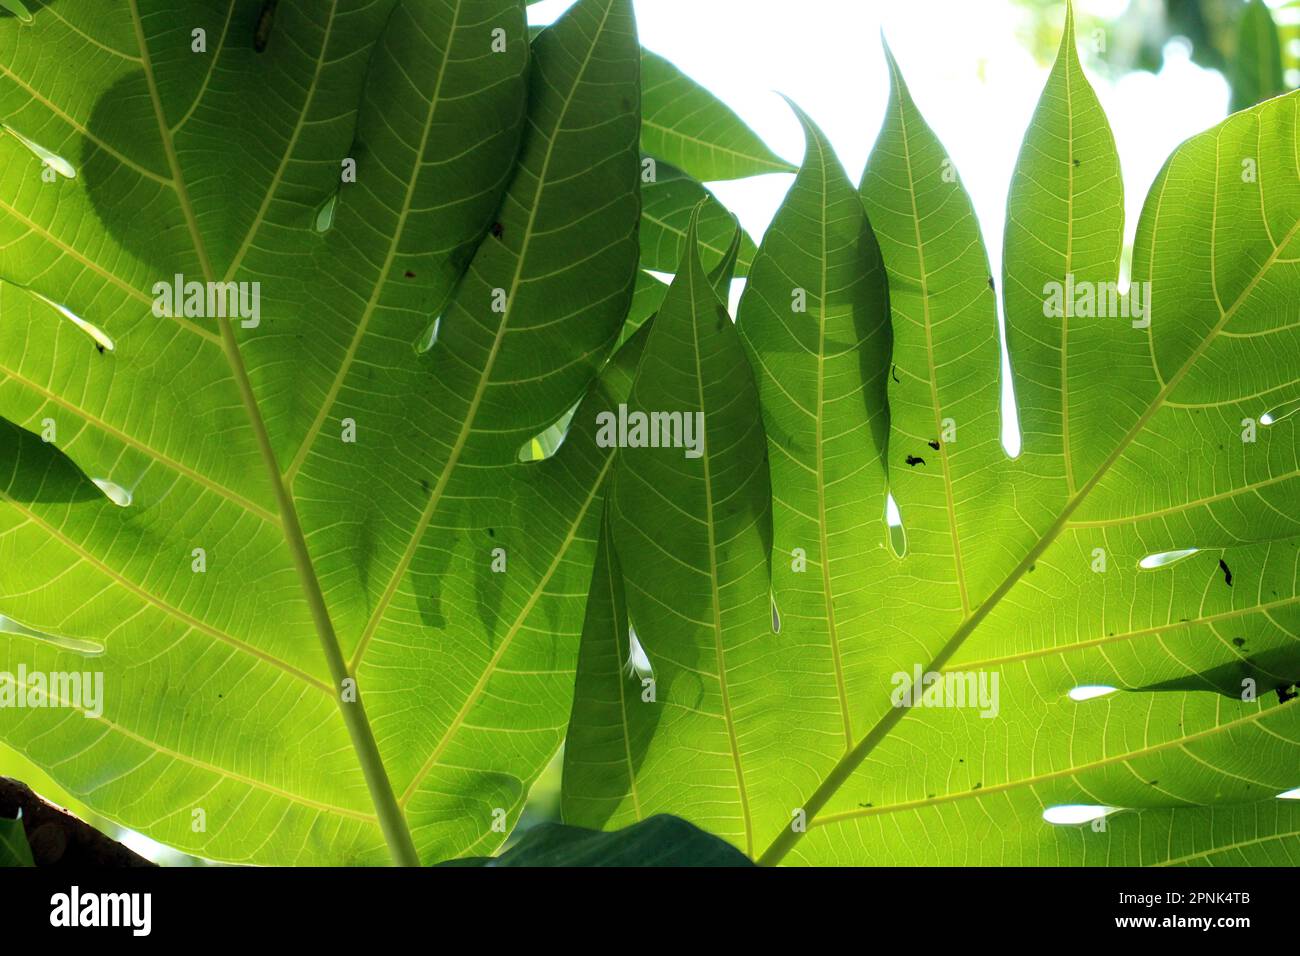 light behind tropical green leaves with shadows Stock Photo